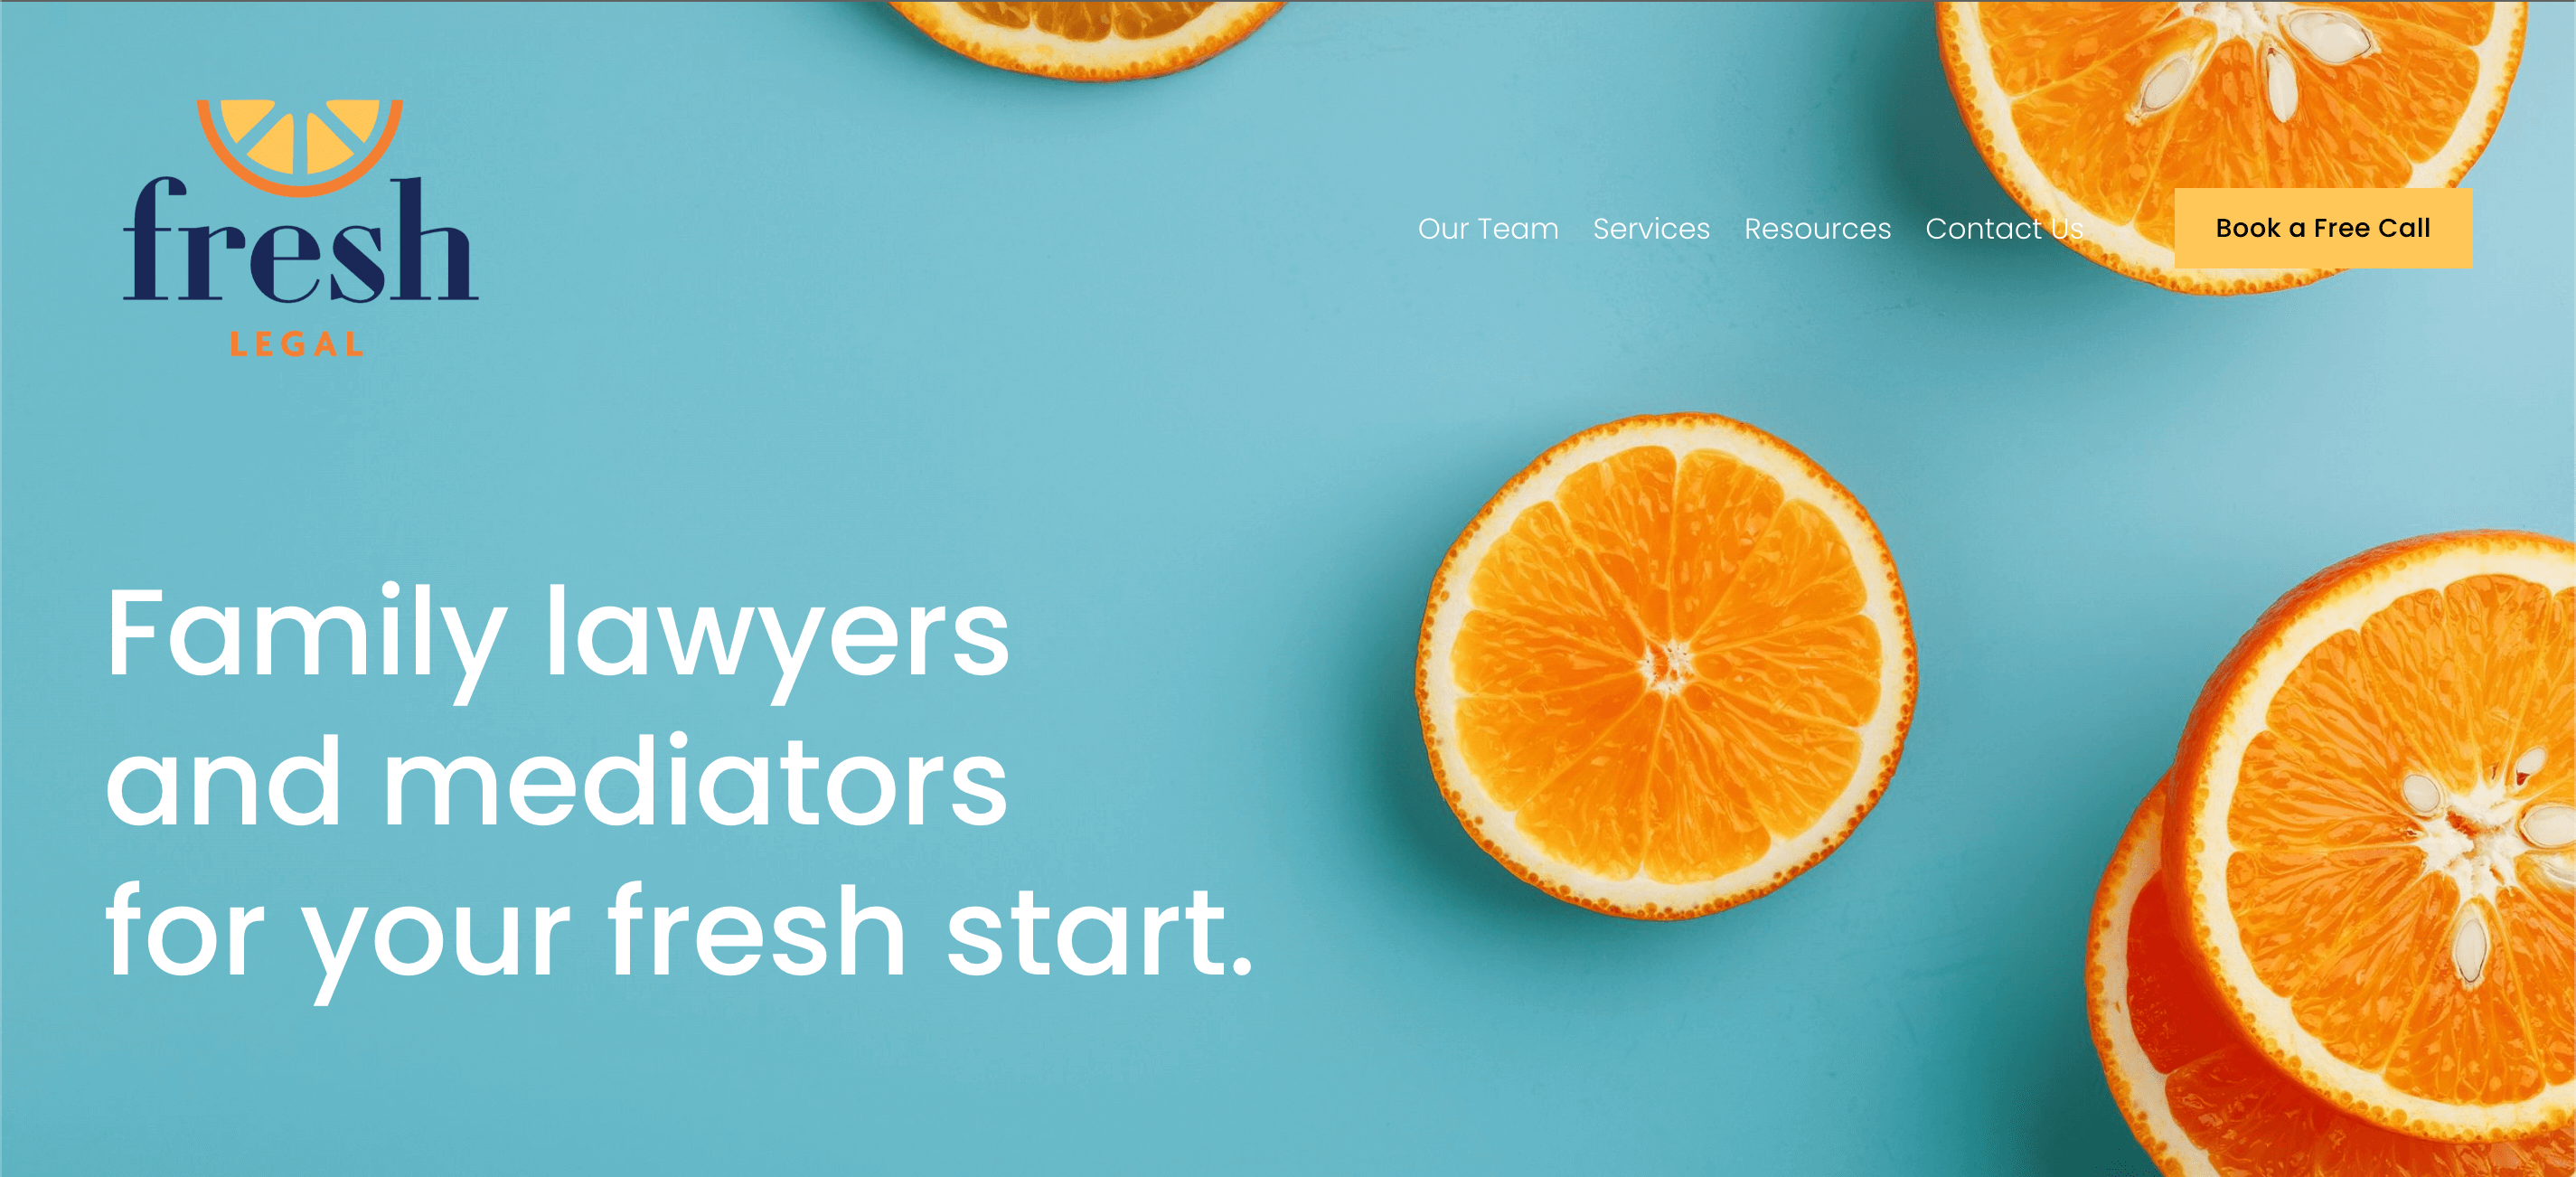 Fresh legal's website. The slogan "Family lawyers and mediators fo your fresh start" on top of a photo of orange slices against a light blue background. 